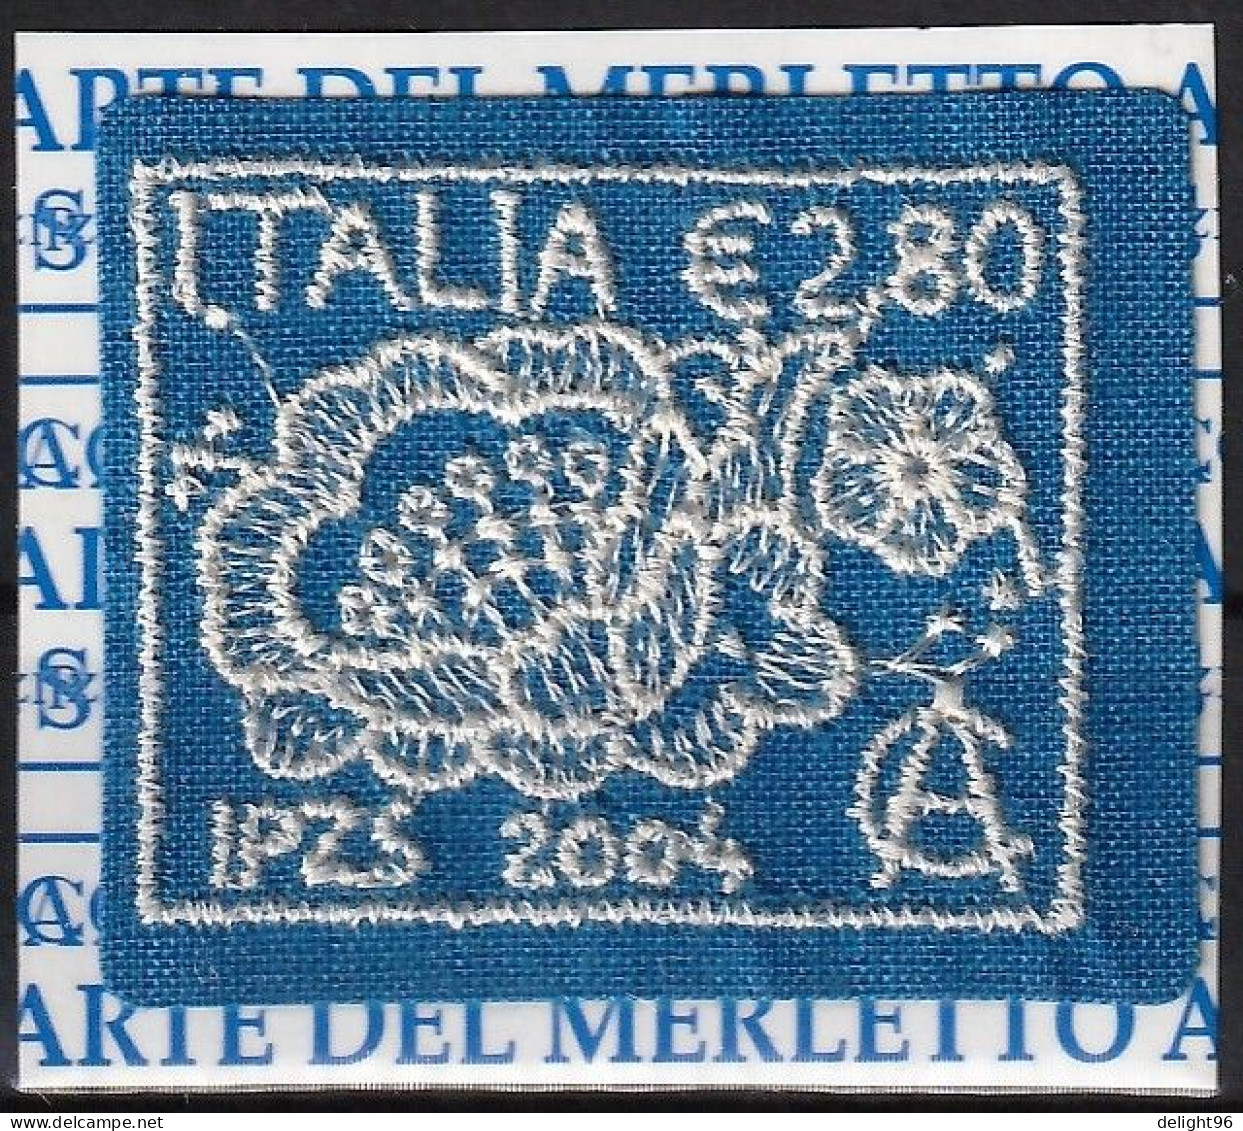 2004 Italy Blossom Embroidery Stamp (Embroidery On Cotton Fabric, Self Adhesive) - Erreurs Sur Timbres